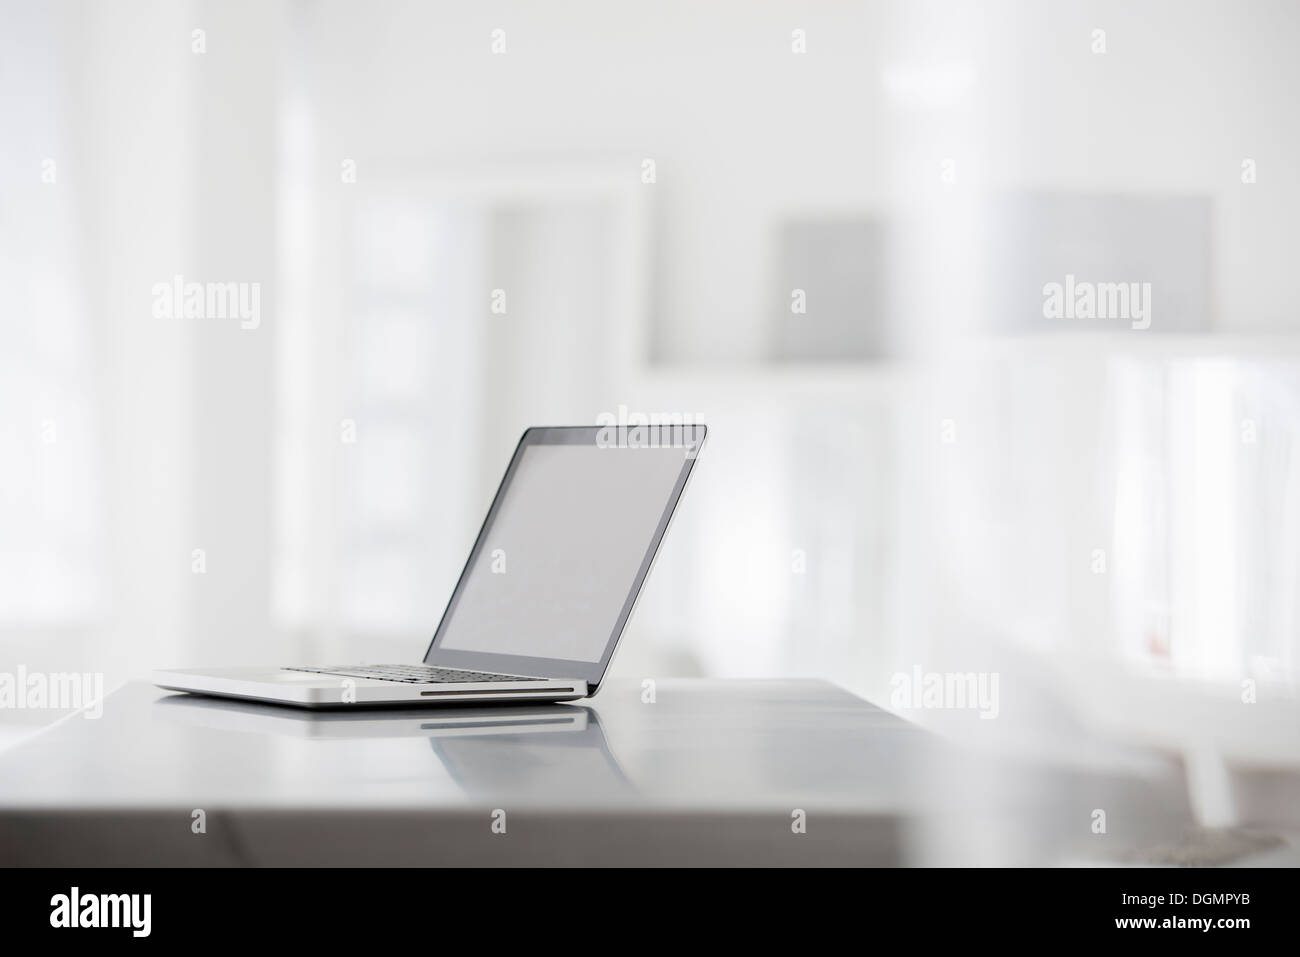 Office interior. A smooth shiny grey tabletop, and an open laptop computer. Stock Photo